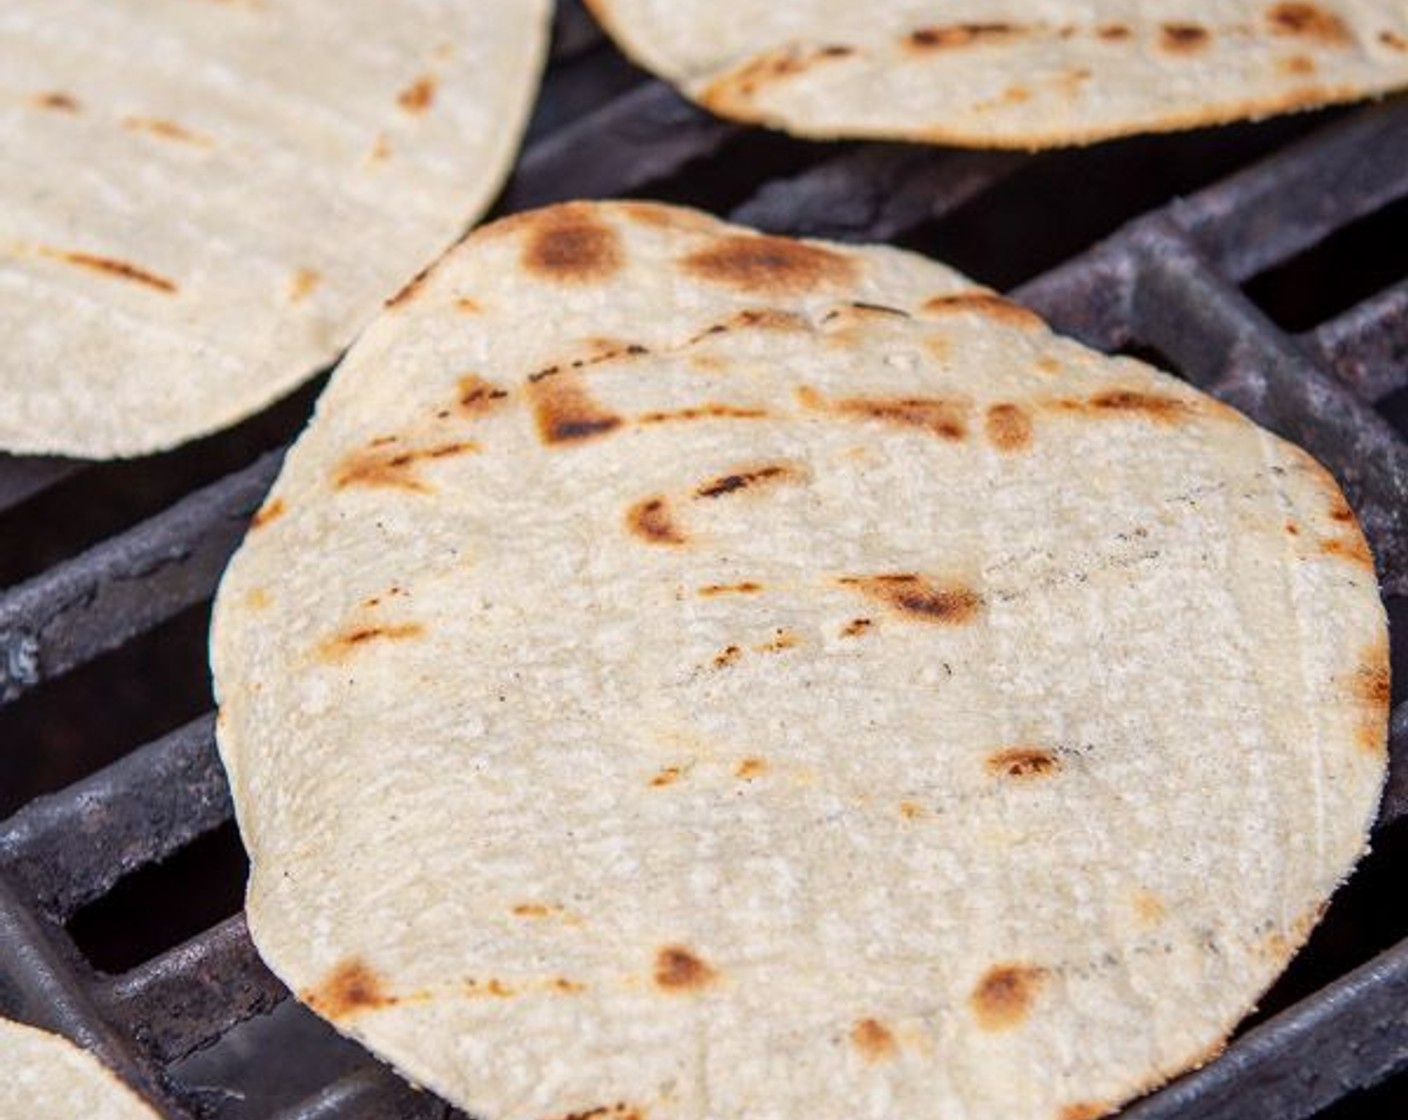 step 7 For grilled tortillas, clean grate then place Flour Tortillas (12) directly on dry grill. Grill for 2 minutes per side, or until char marks start to appear. Store warm tortillas in foil until ready to serve.